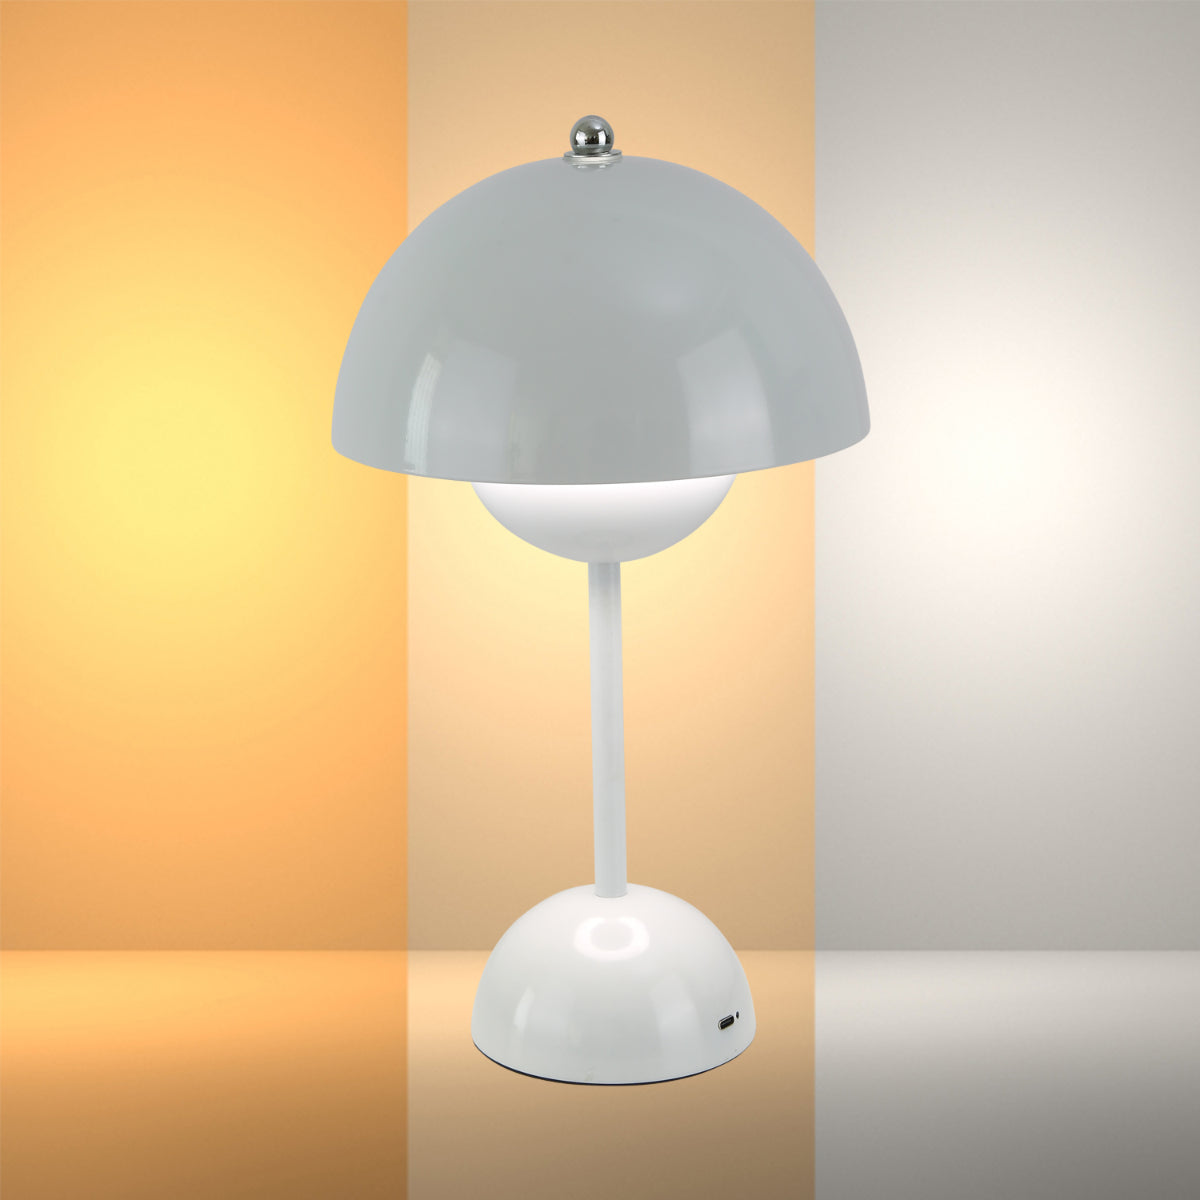 Main image of Spherical Harmony LED Table Lamp – Dual-Color Elegance 130-03734